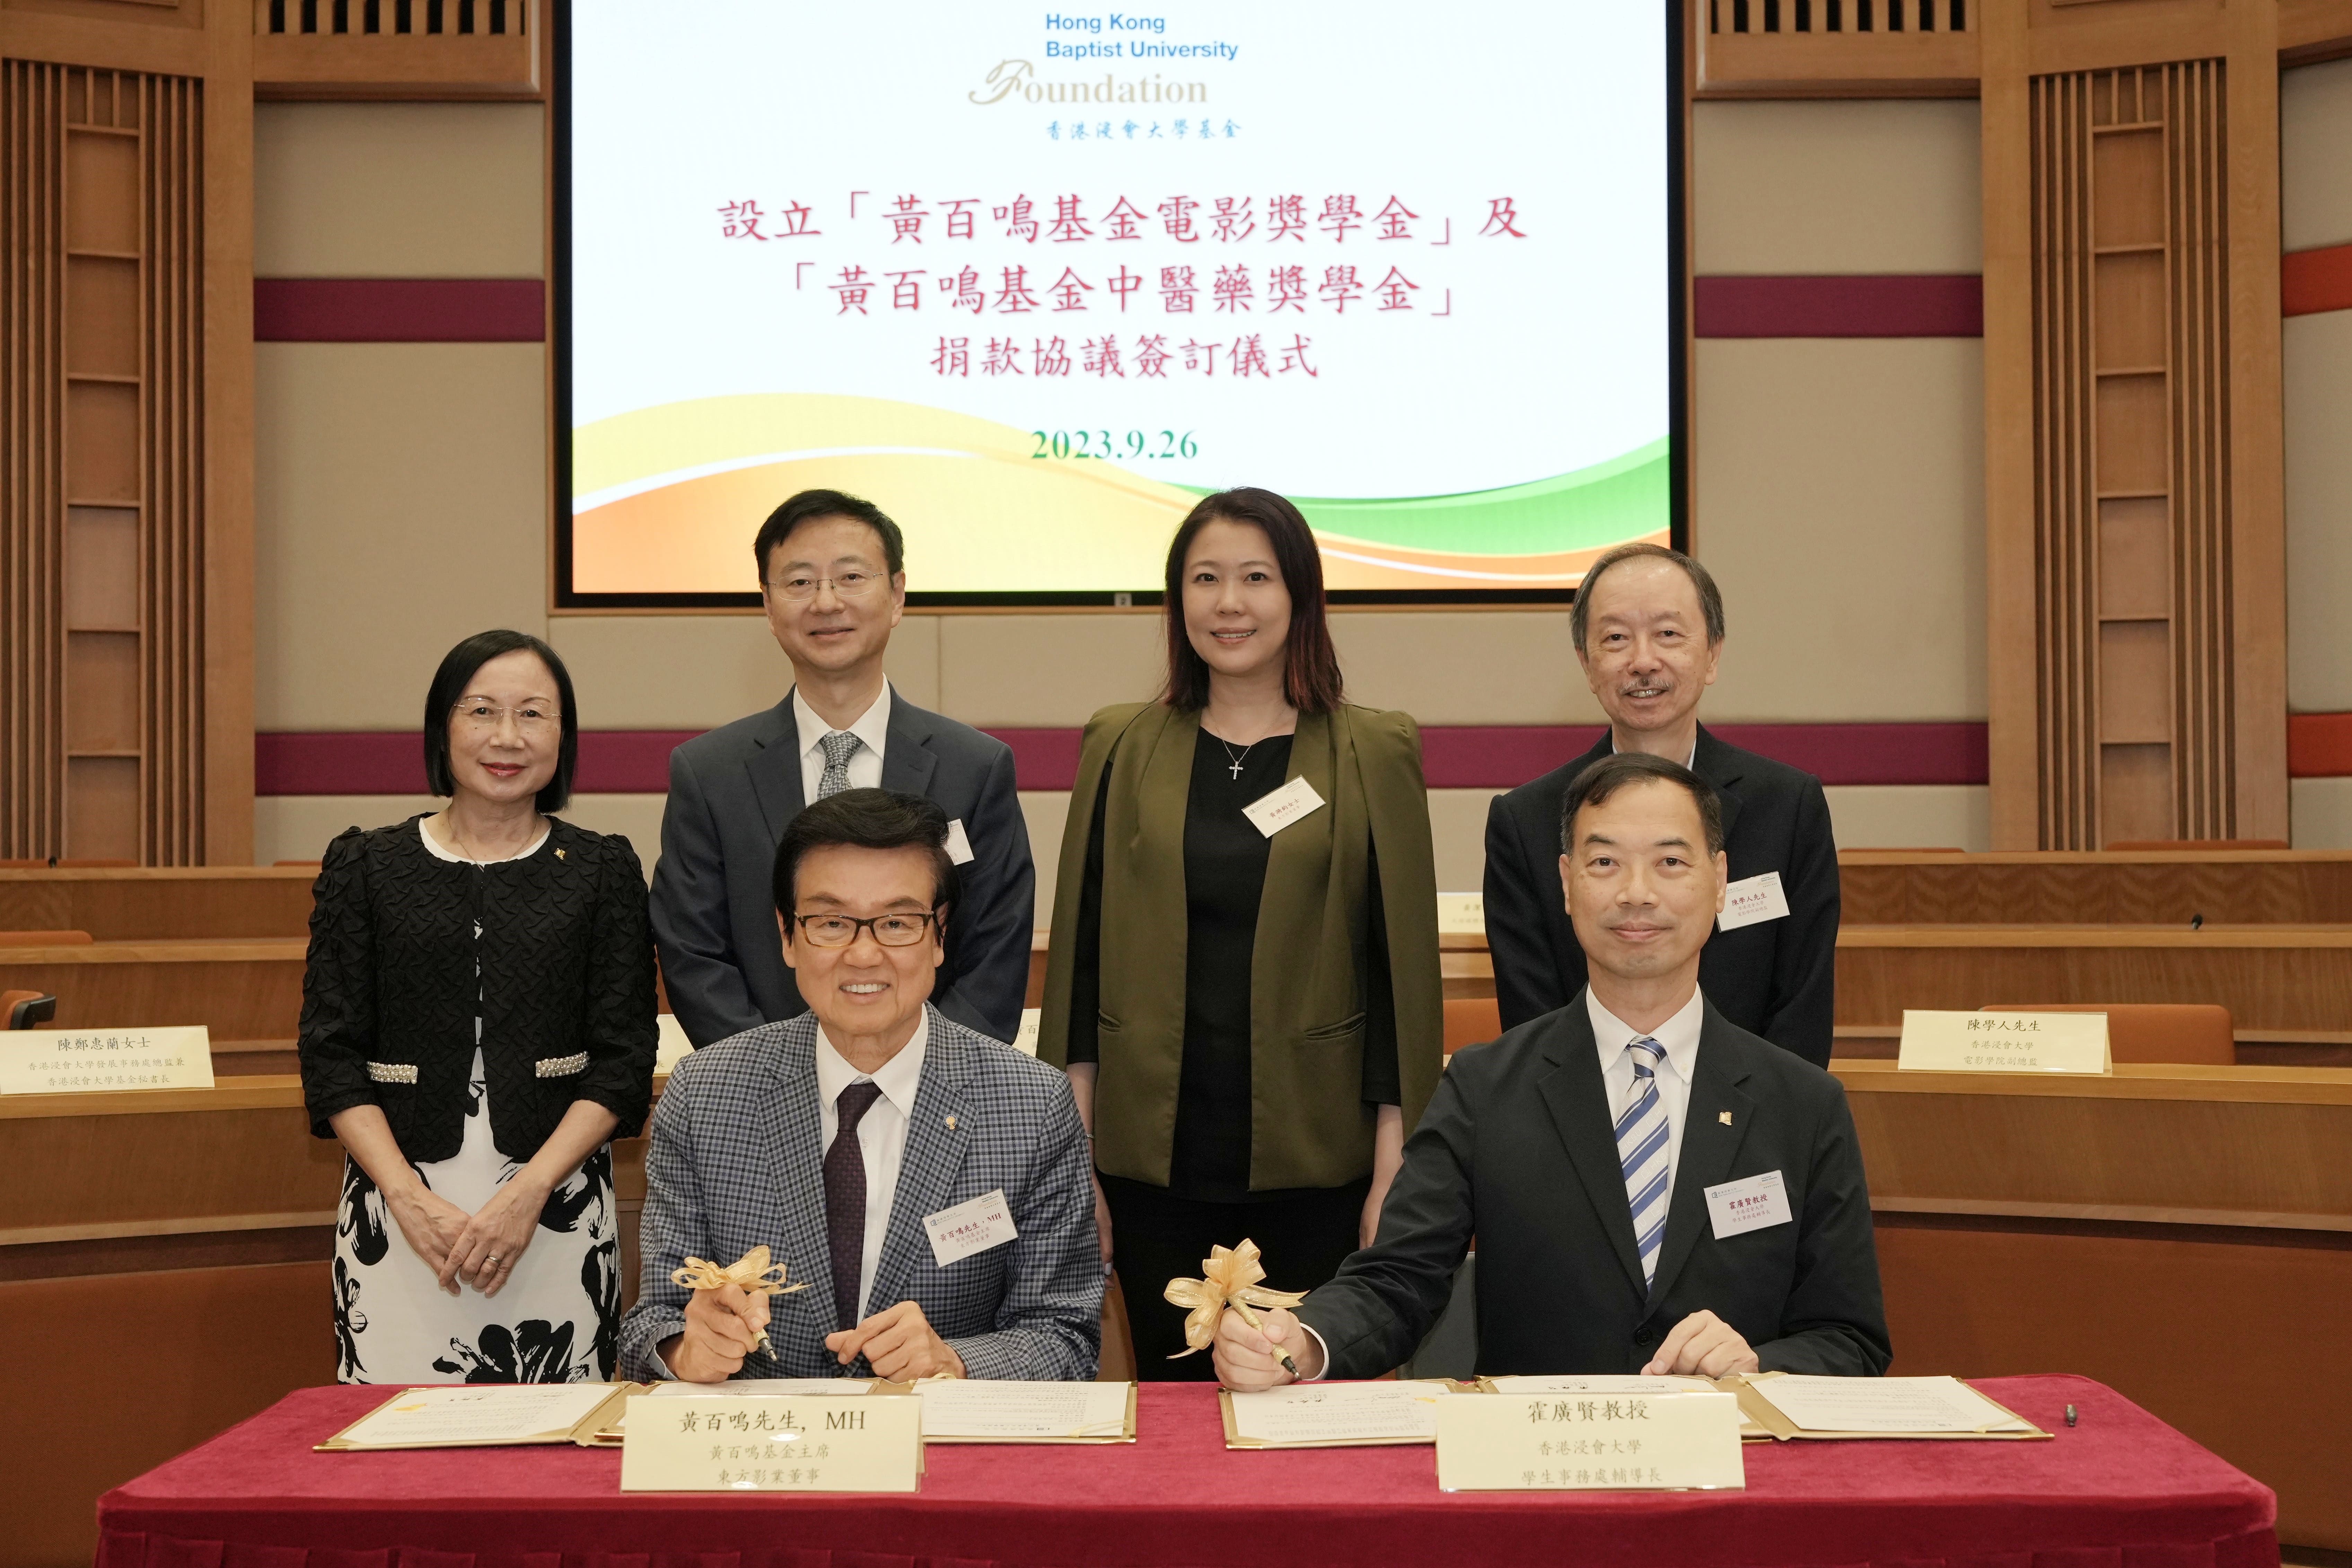 HKBU receives donation from Raymond Wong Pak Ming Foundation for Film and Chinese Medicine scholarships